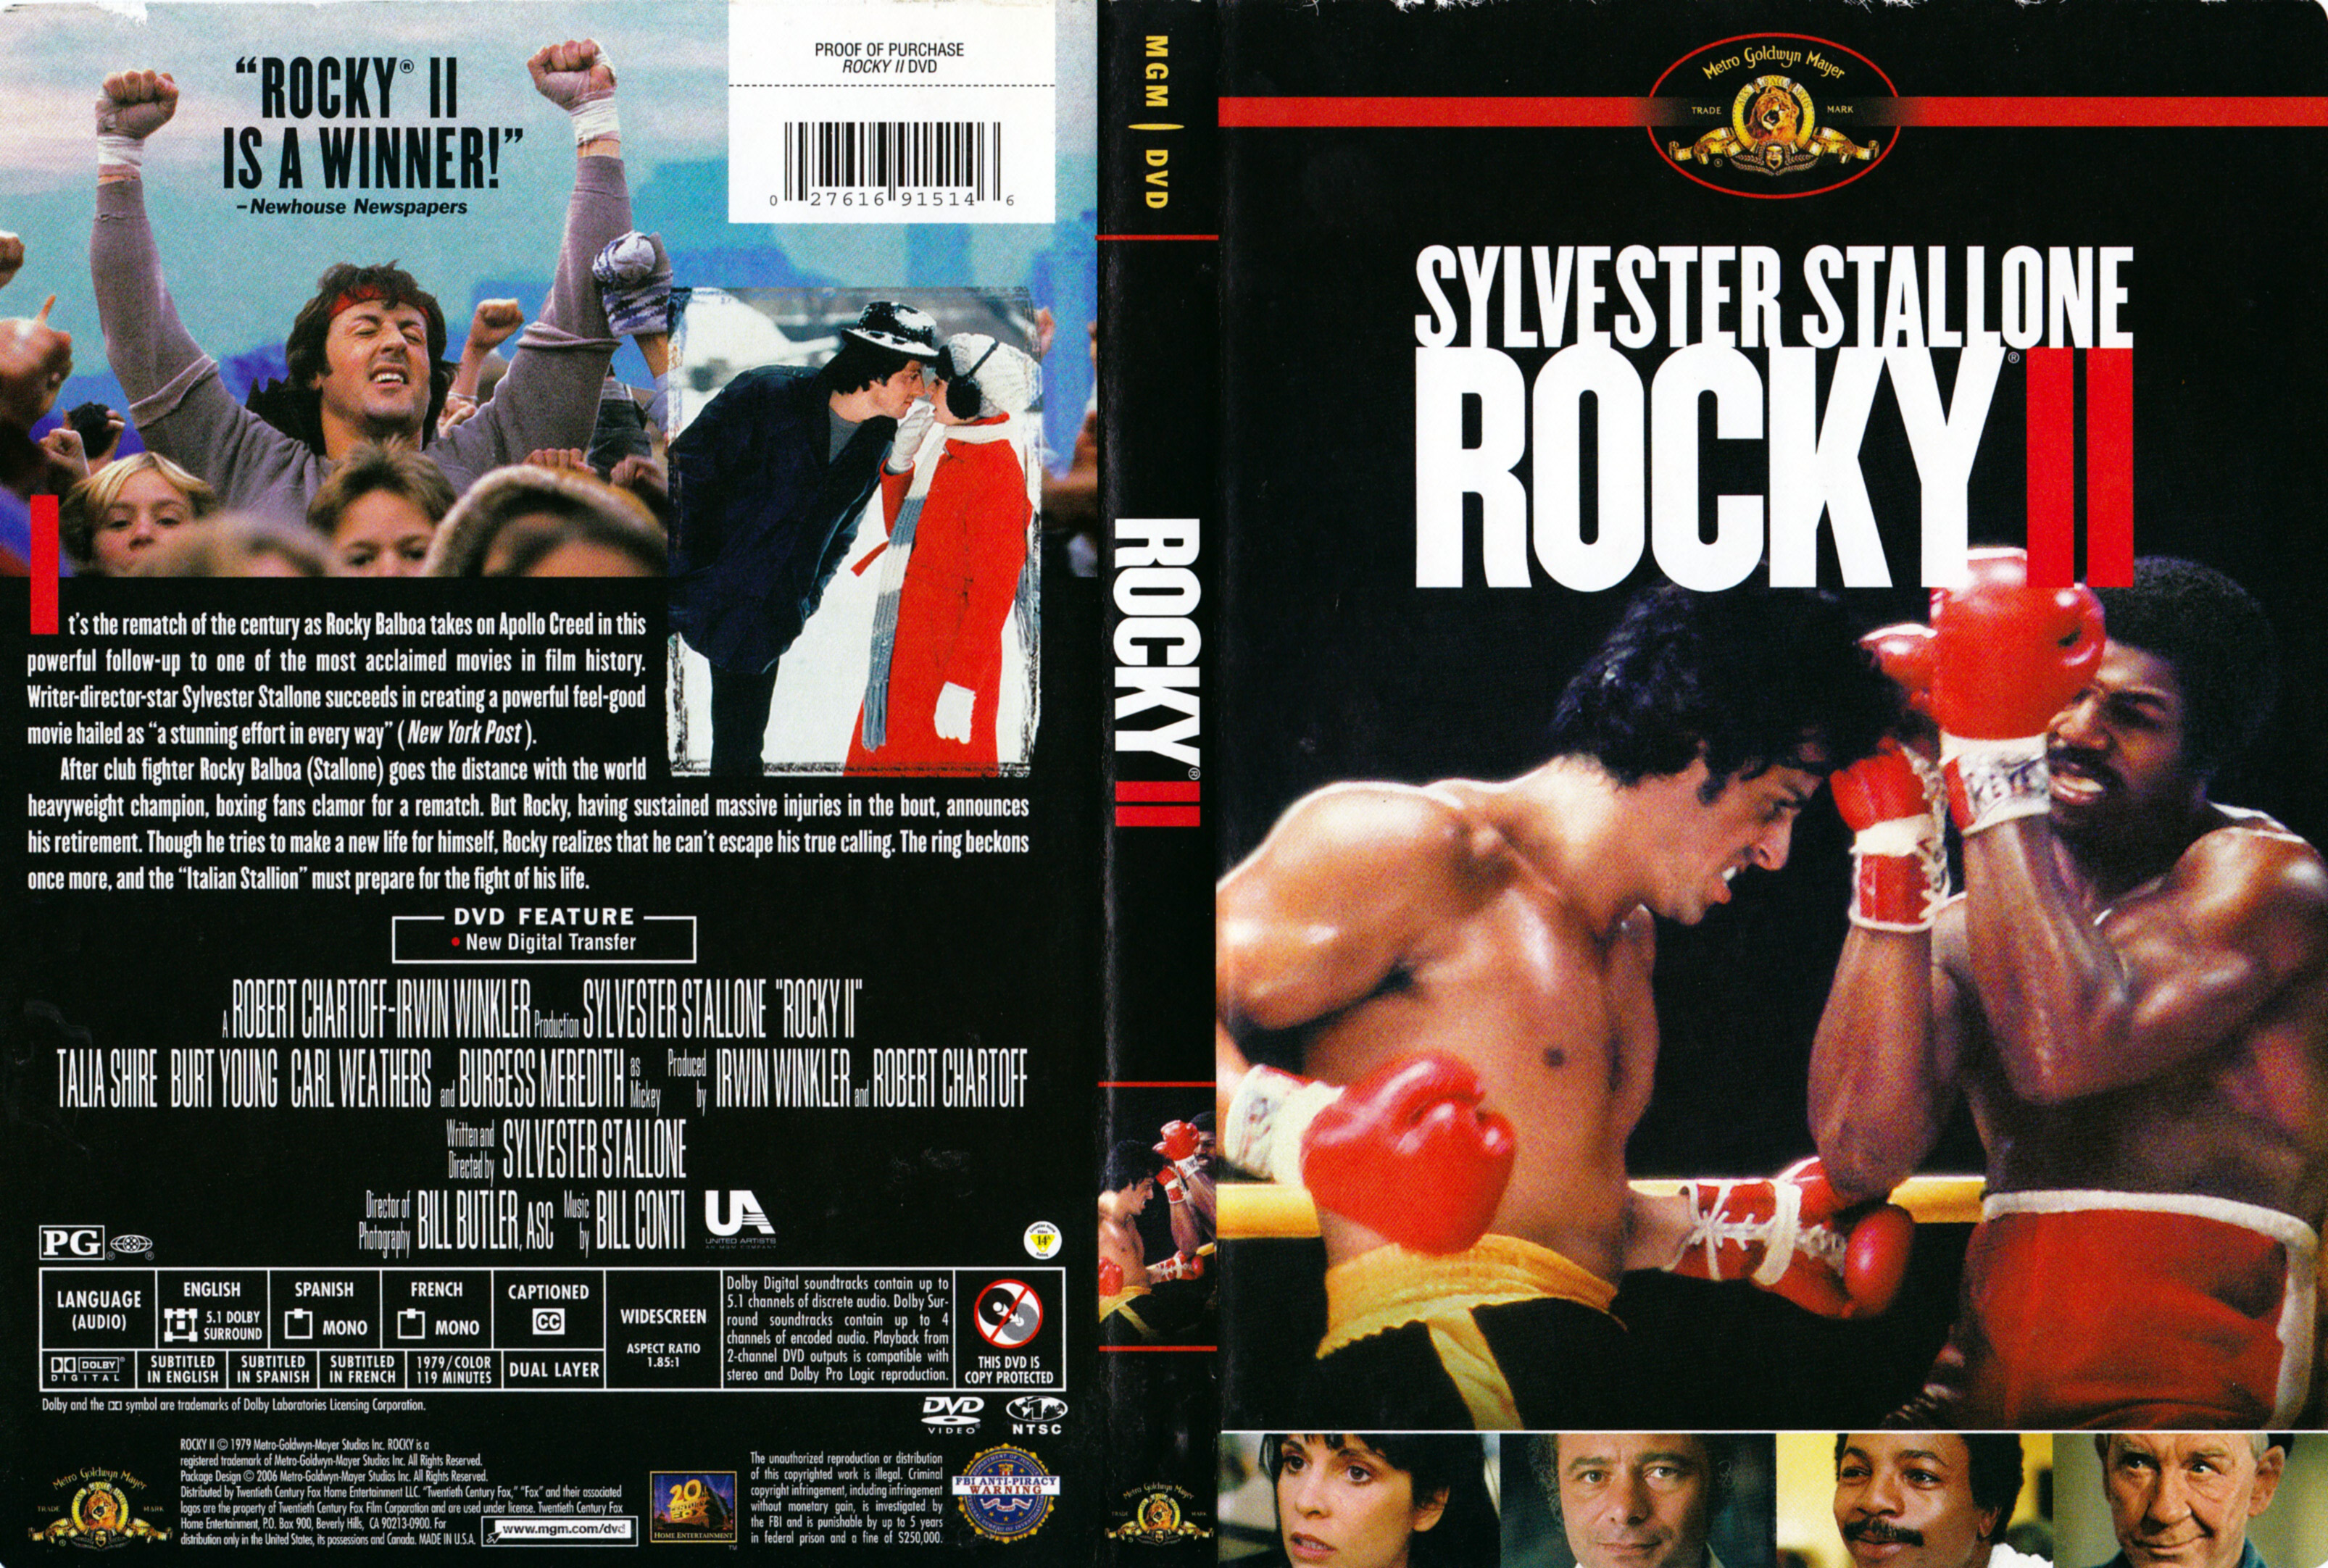 Jaquette DVD Rocky 2 (Canadienne)